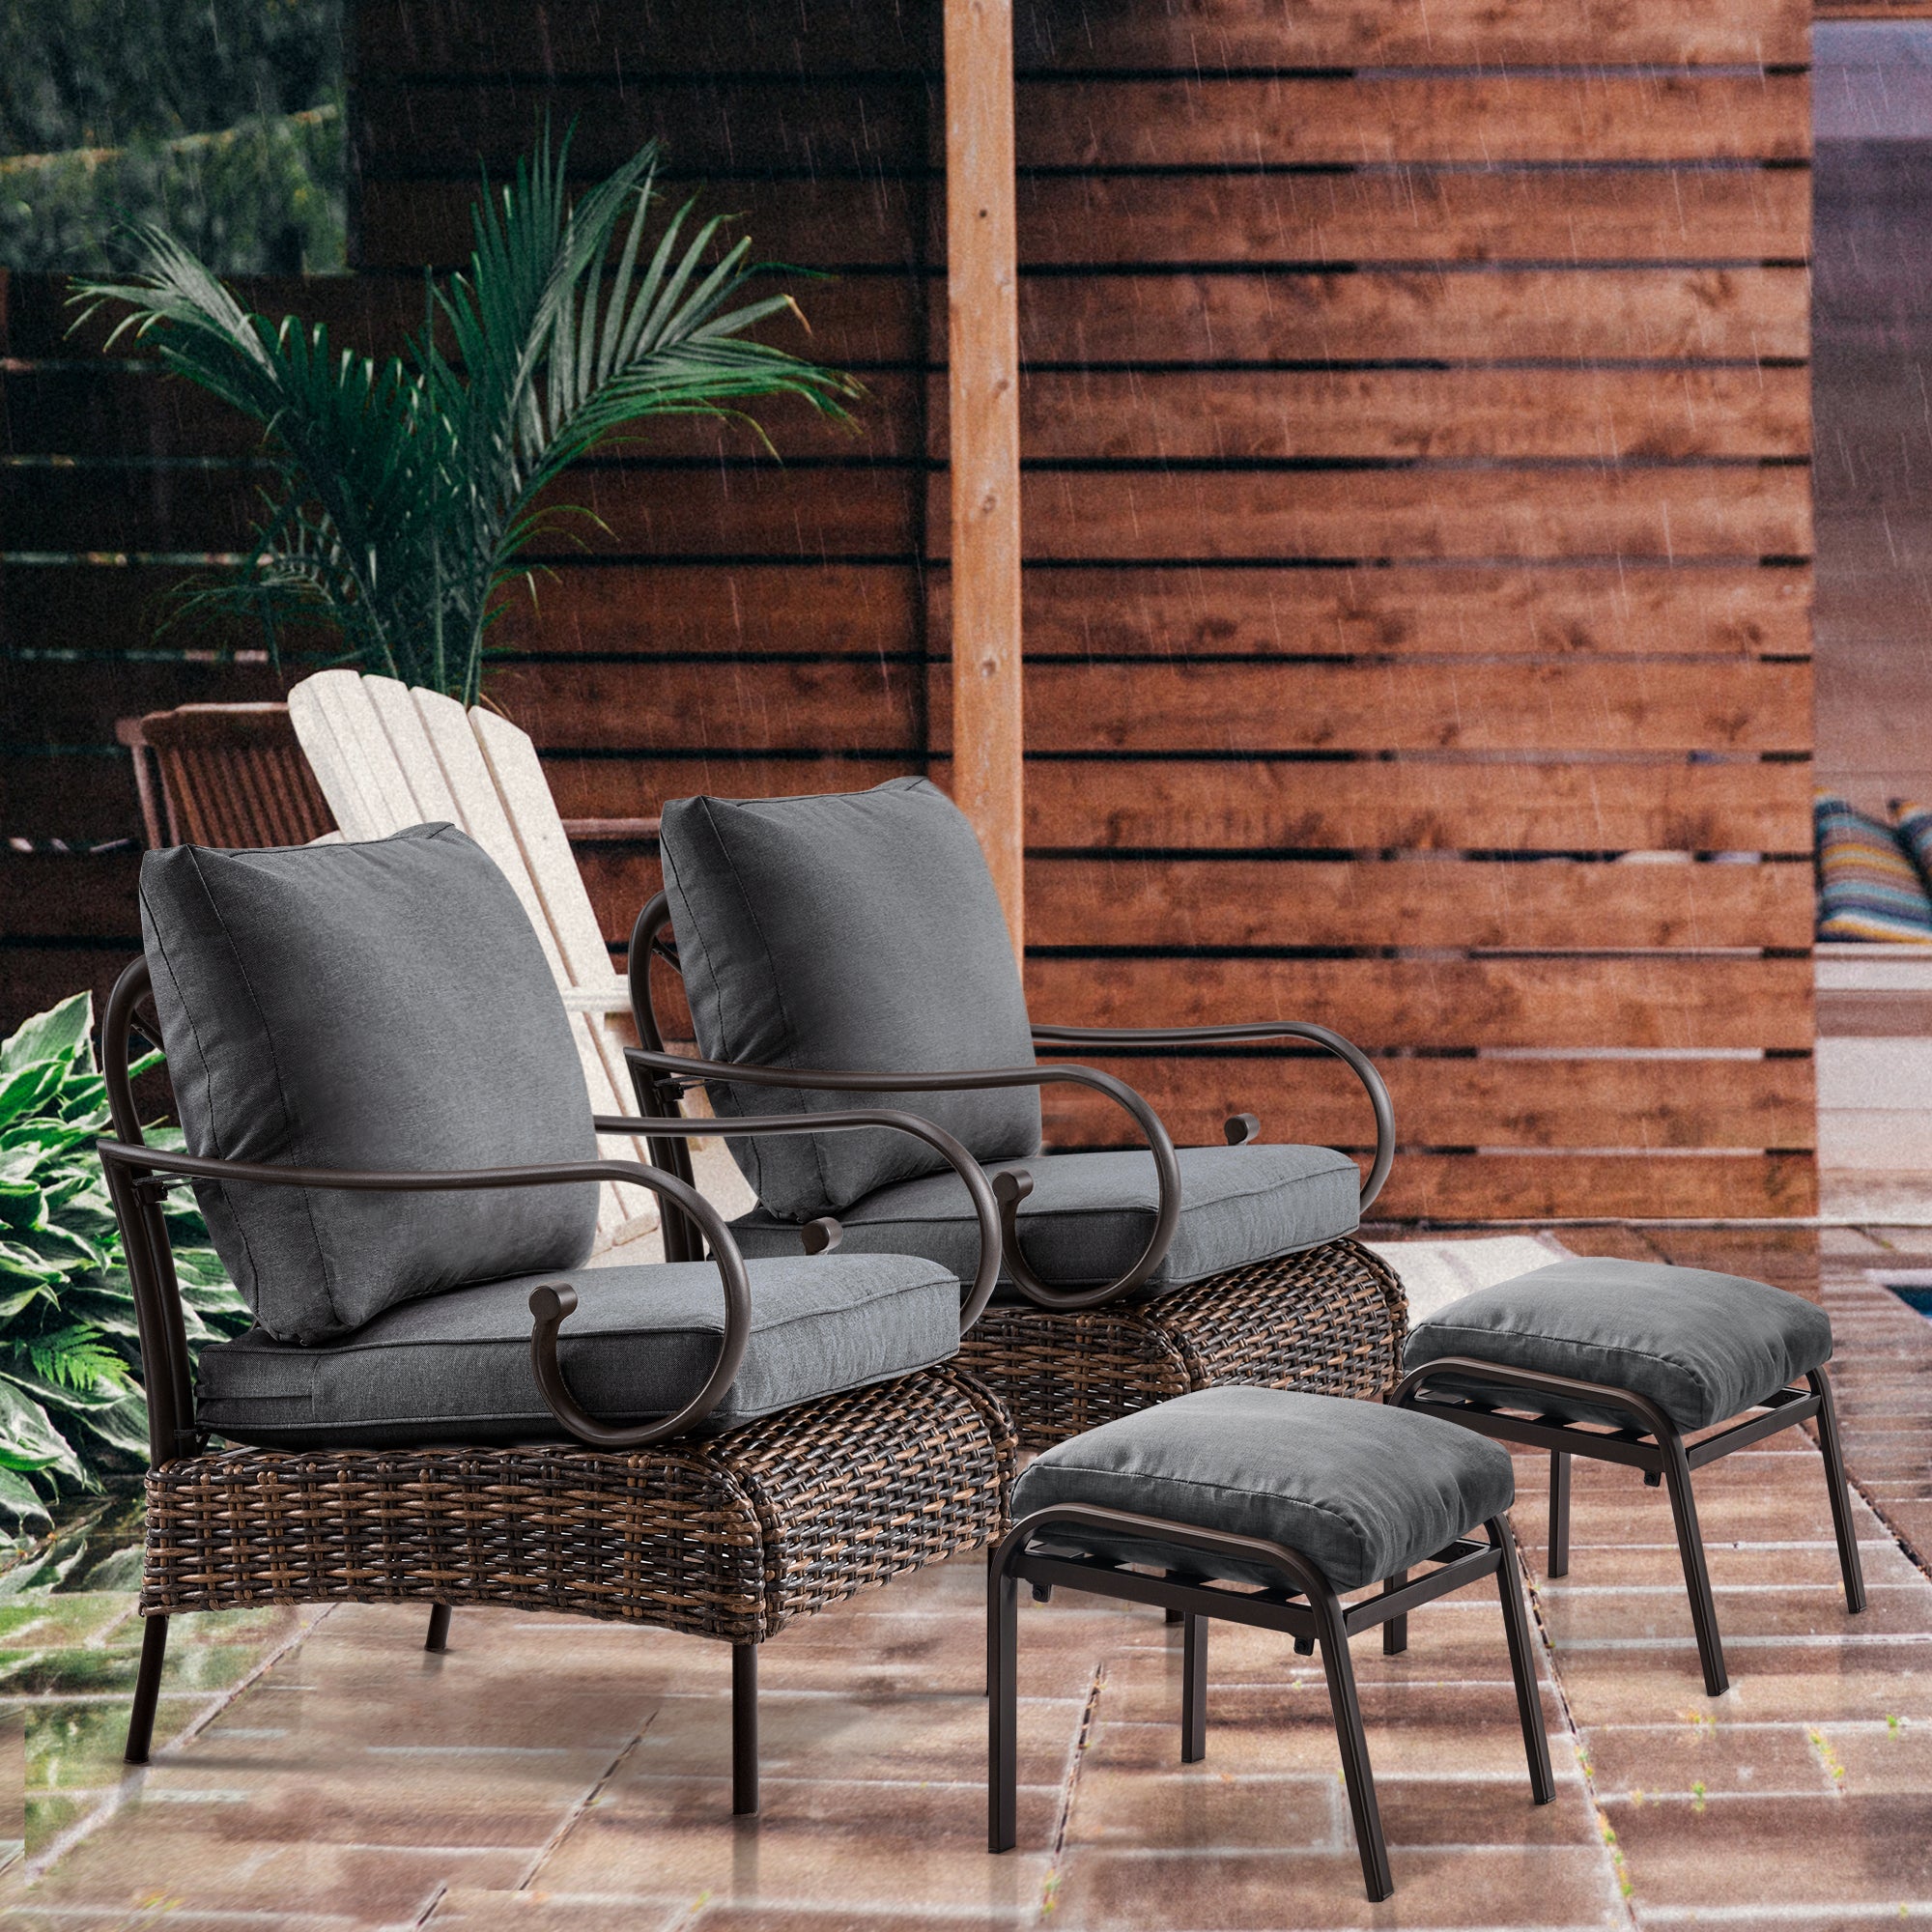 ivinta Outdoor Chair with Ottoman, Patio Wicker Chair with Fabric Cushions, 2 Piece PE Rattan Chair for Garden